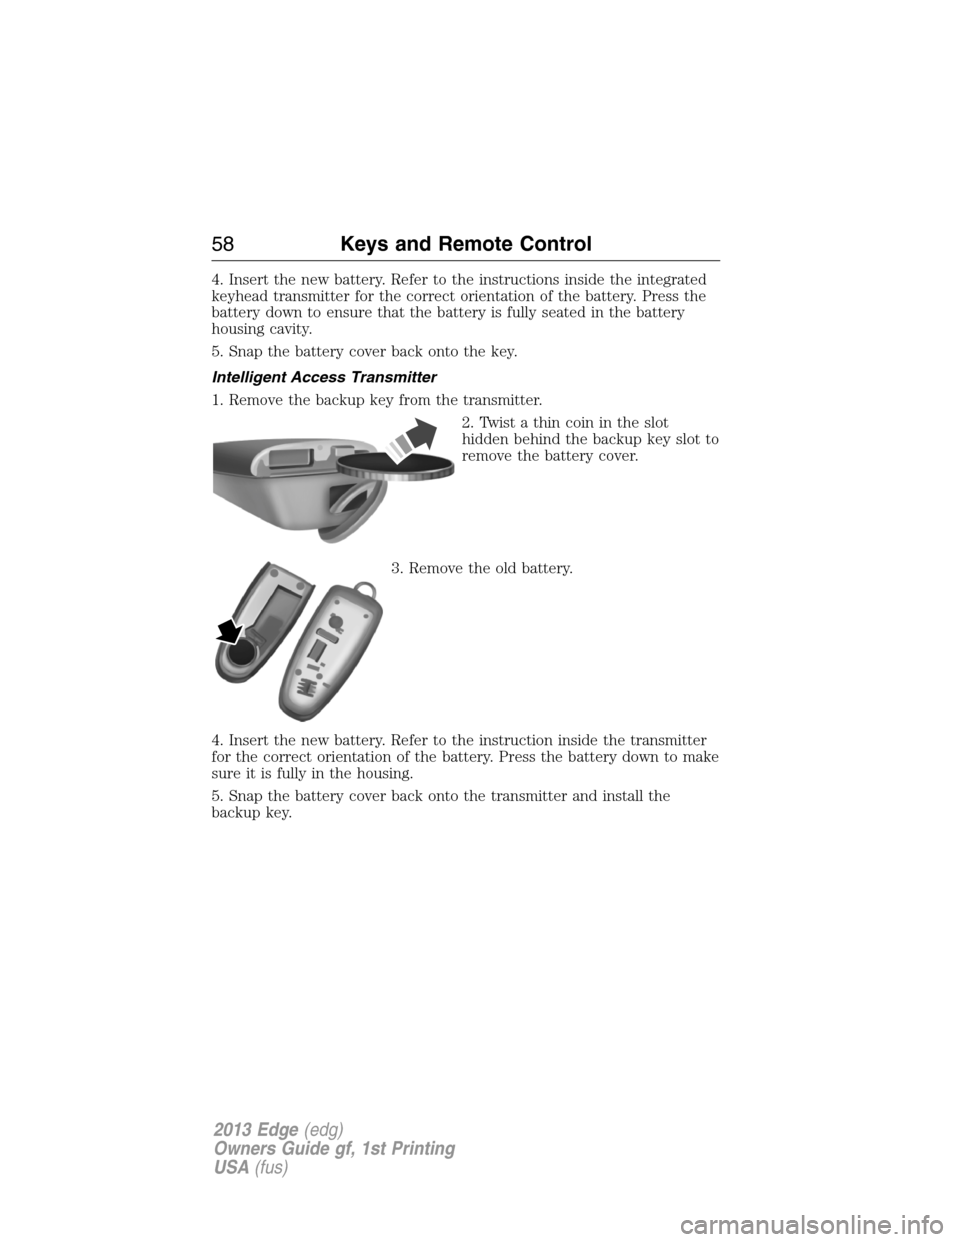 FORD EDGE 2013 1.G Owners Manual 4. Insert the new battery. Refer to the instructions inside the integrated
keyhead transmitter for the correct orientation of the battery. Press the
battery down to ensure that the battery is fully se